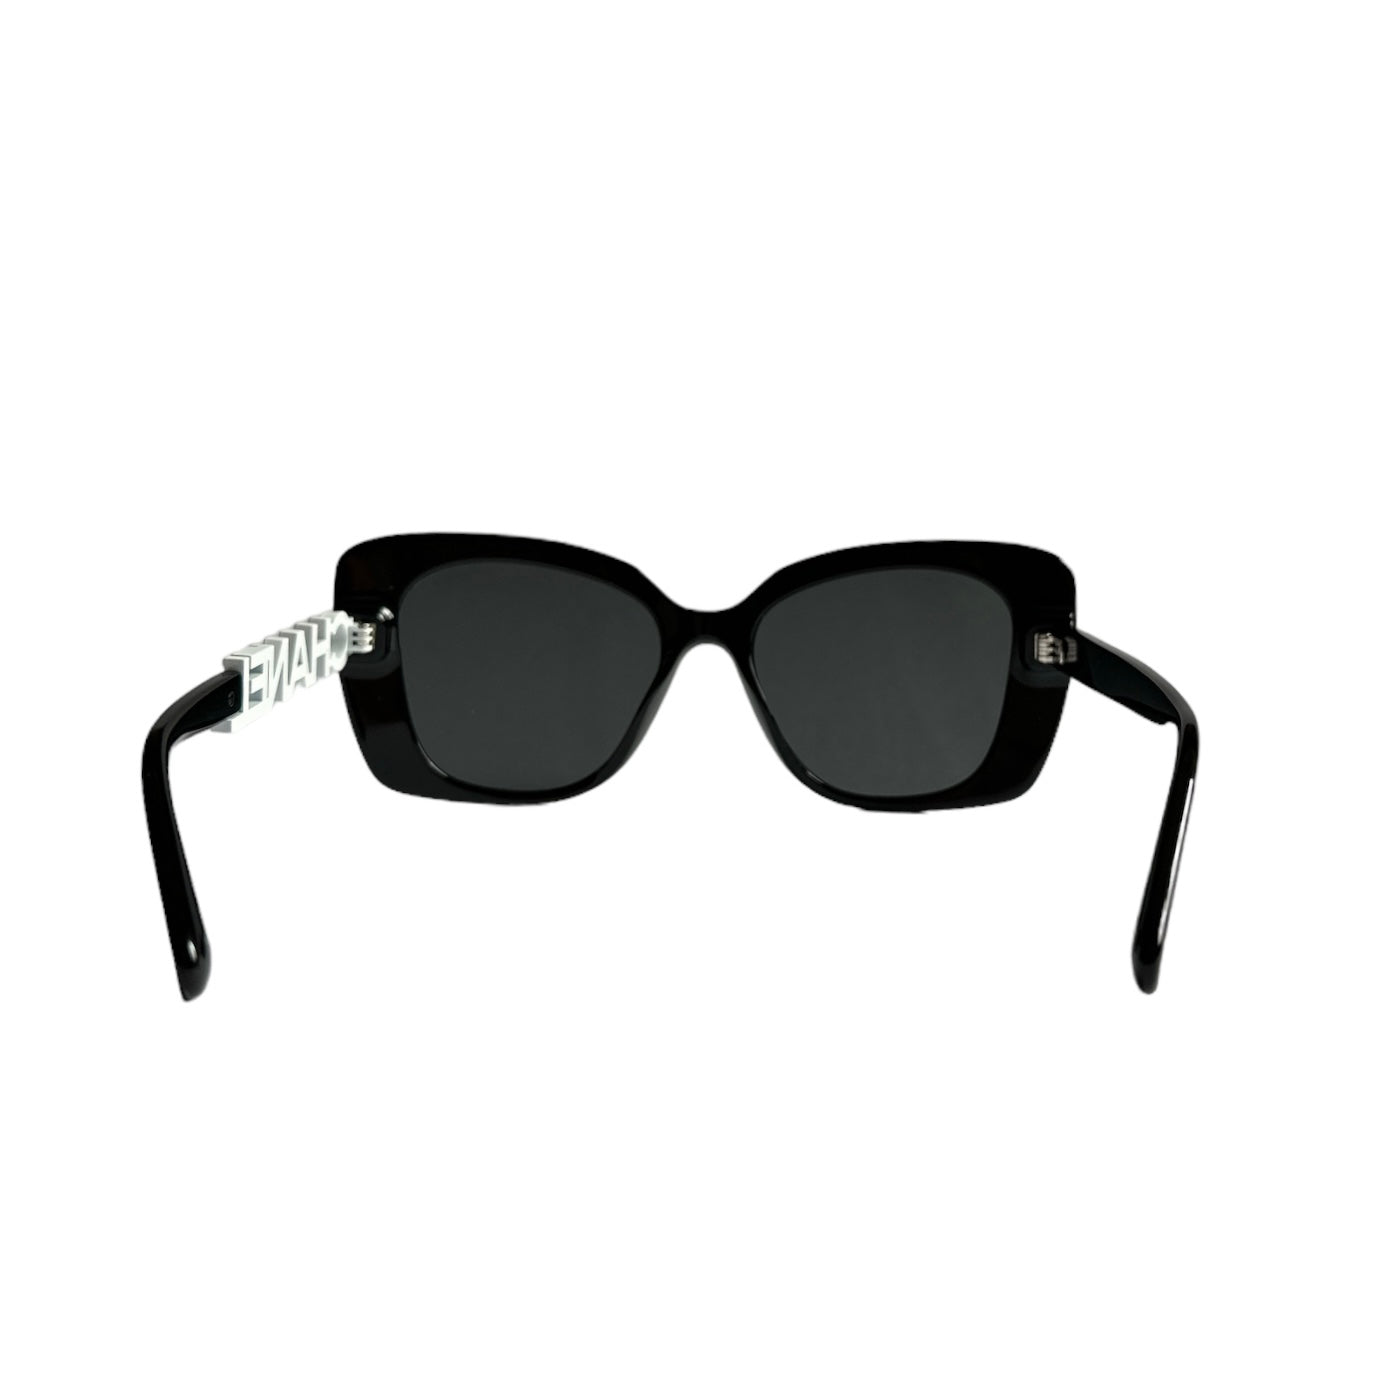 Shop CHANEL 2023 SS Unisex Sunglasses (5422B 1026/S4) by